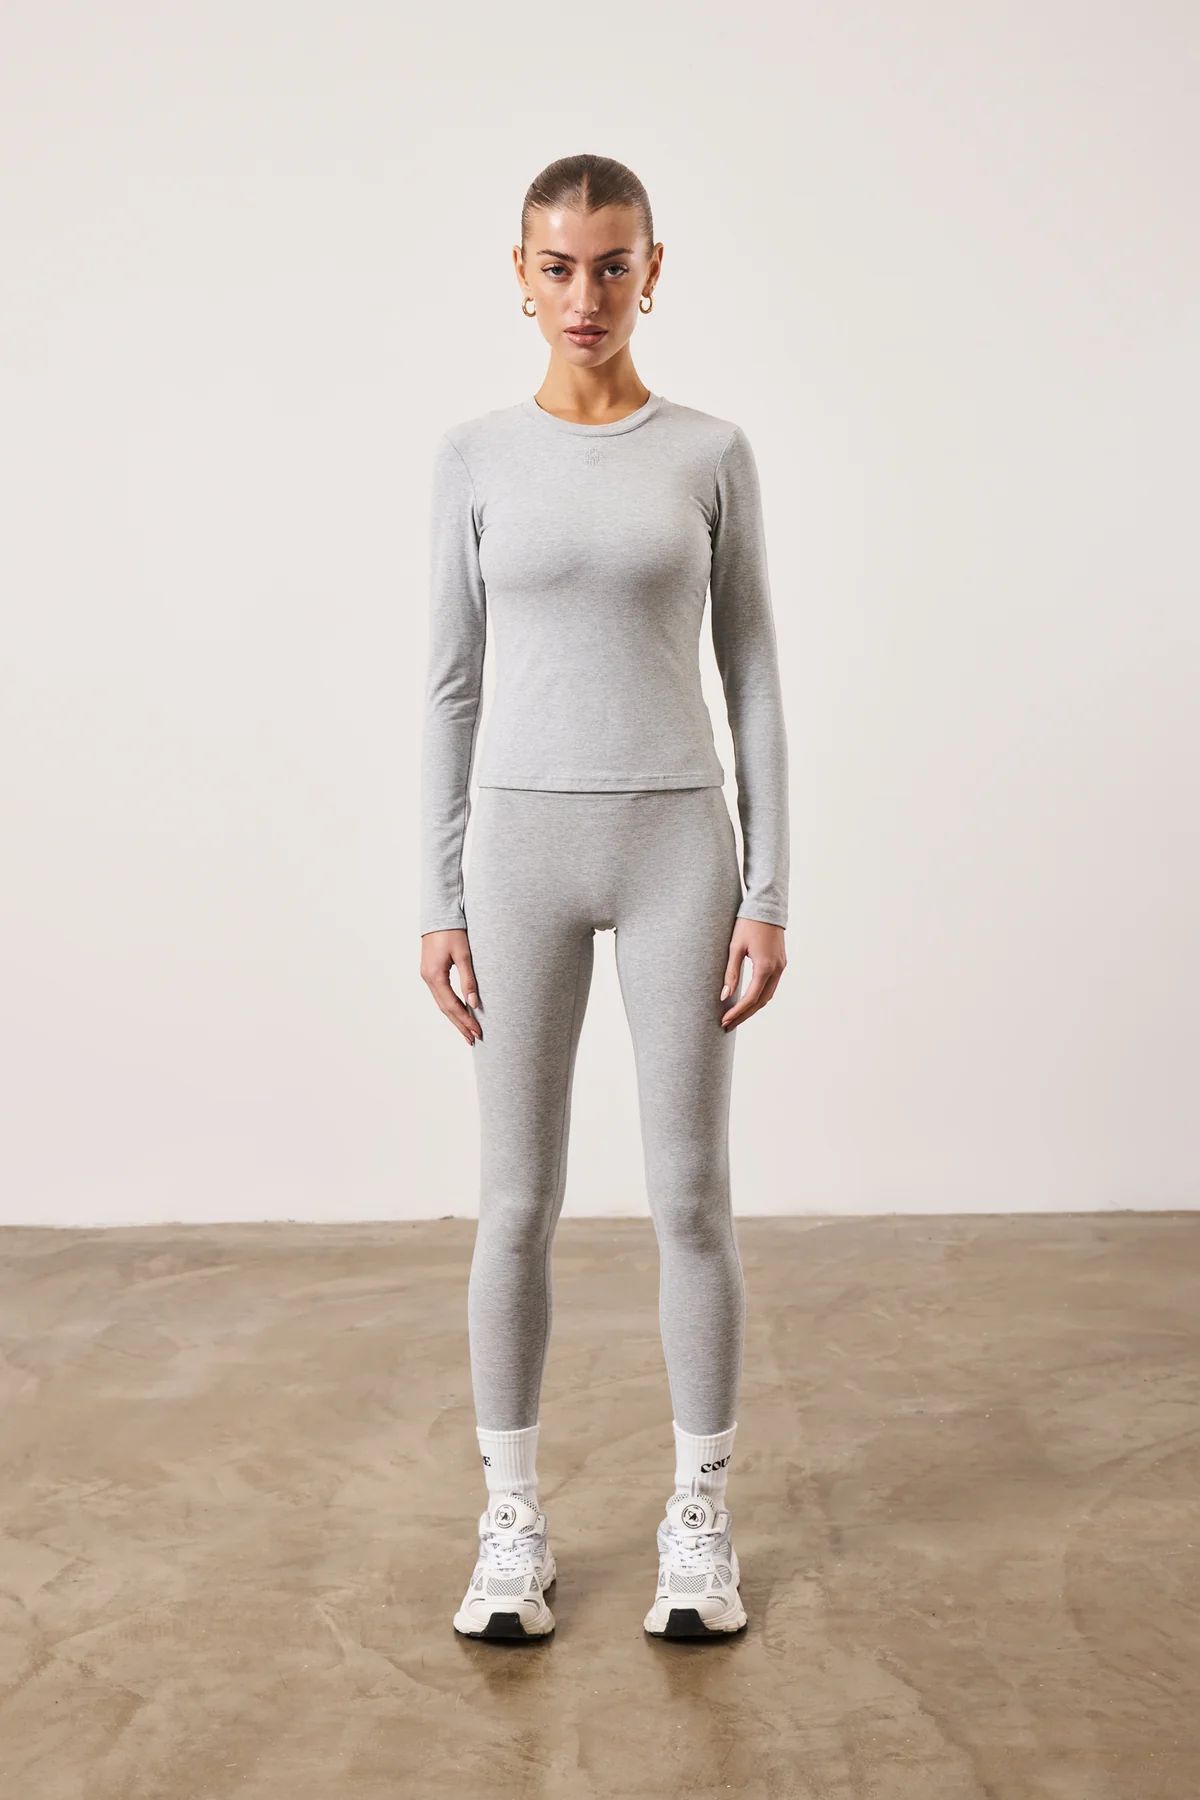 EMBLEM SOFT TOUCH JERSEY LEGGINGS - GREY MARL | The Couture Club